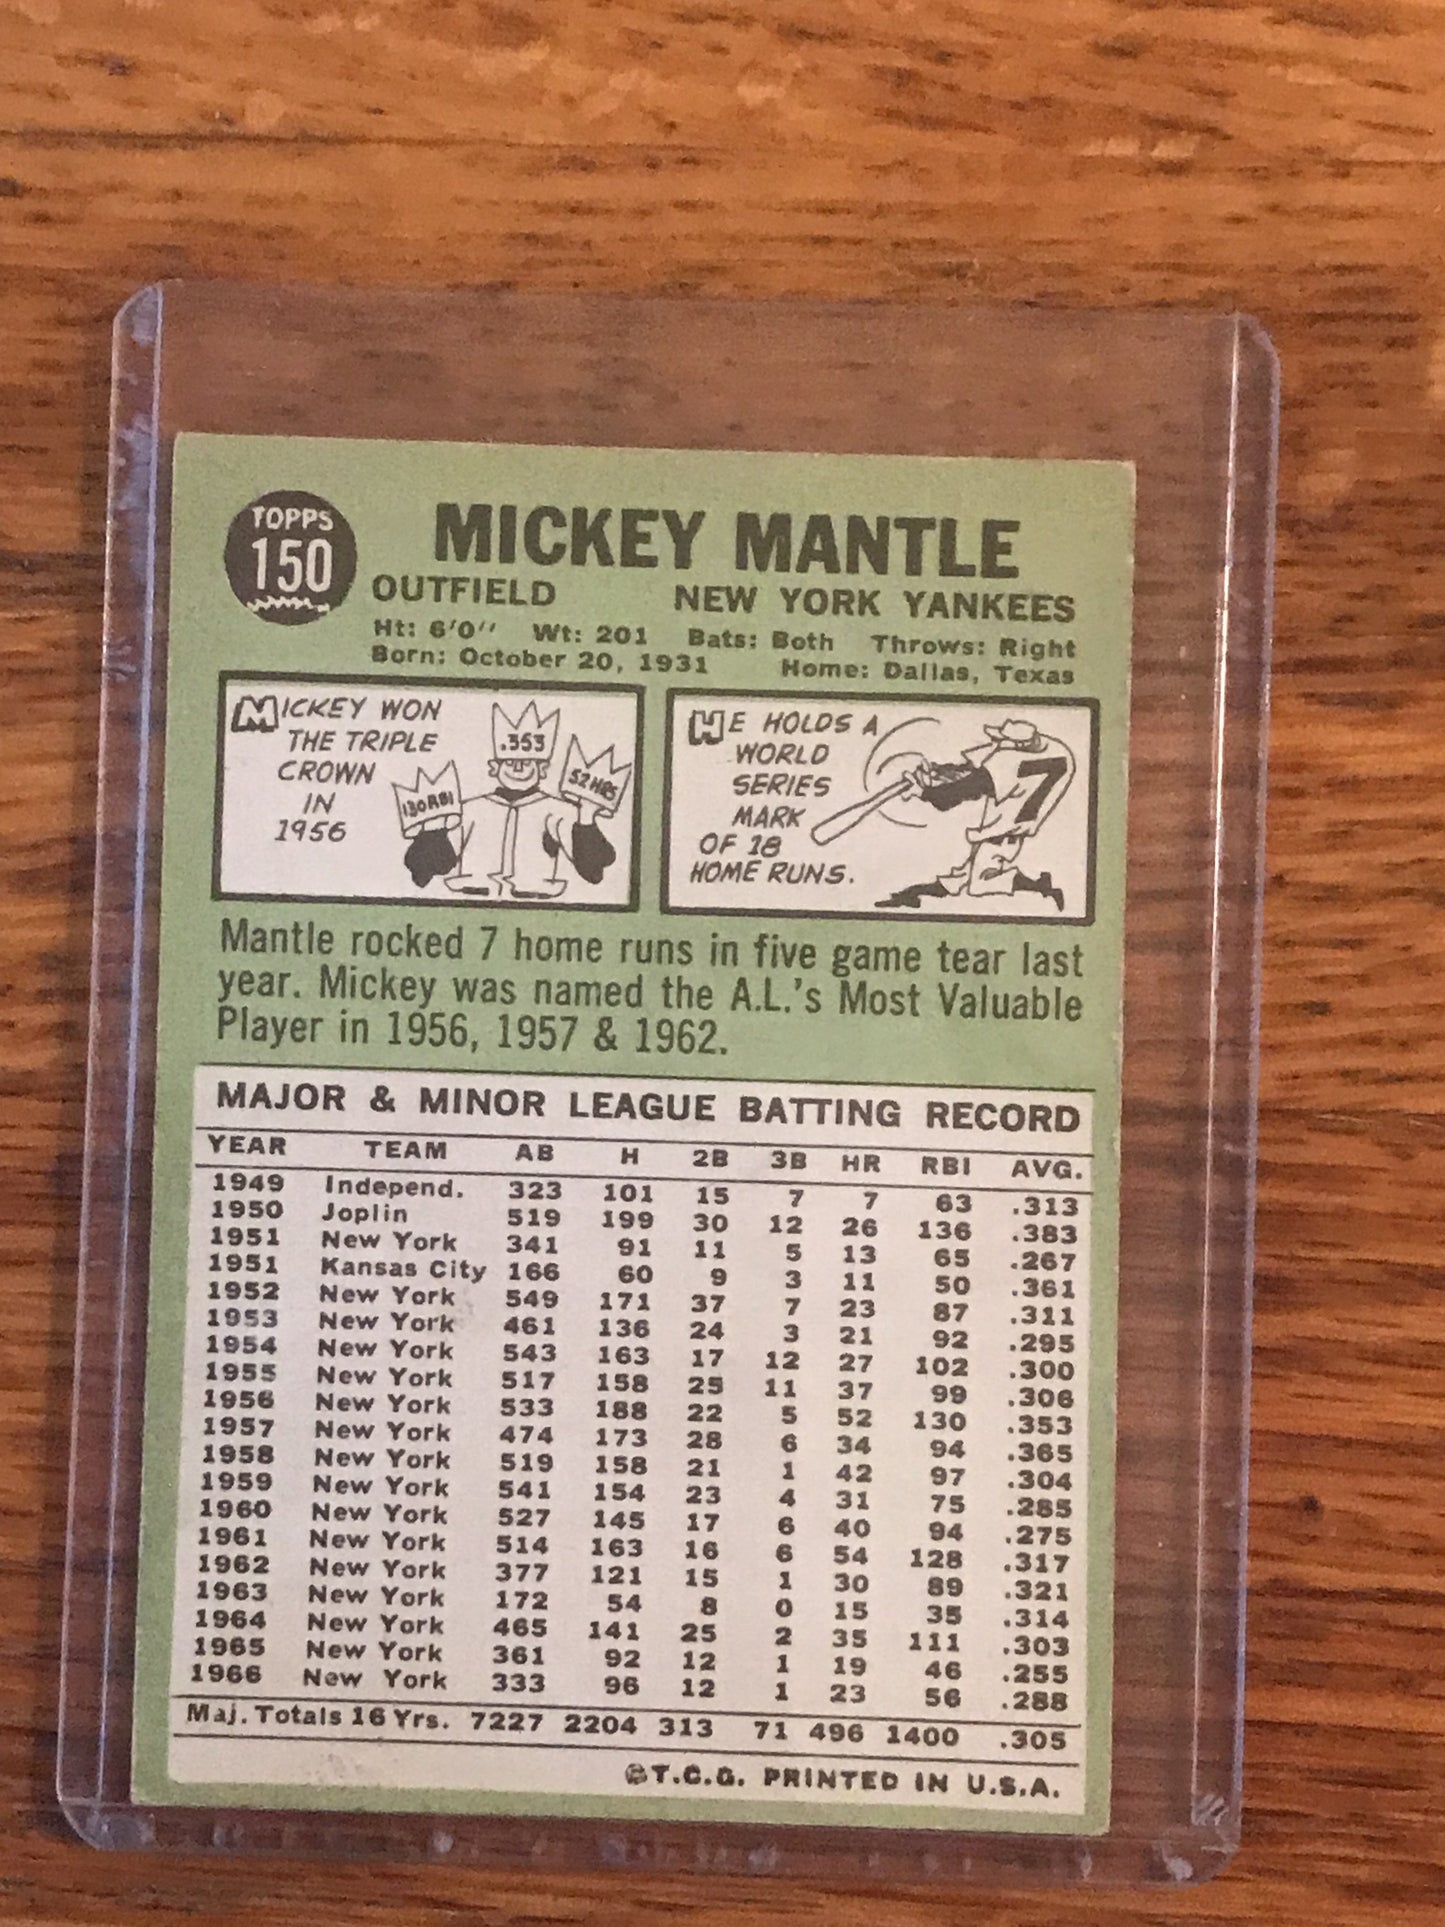 1967 Topps #150 Mickey Mantle - Topps